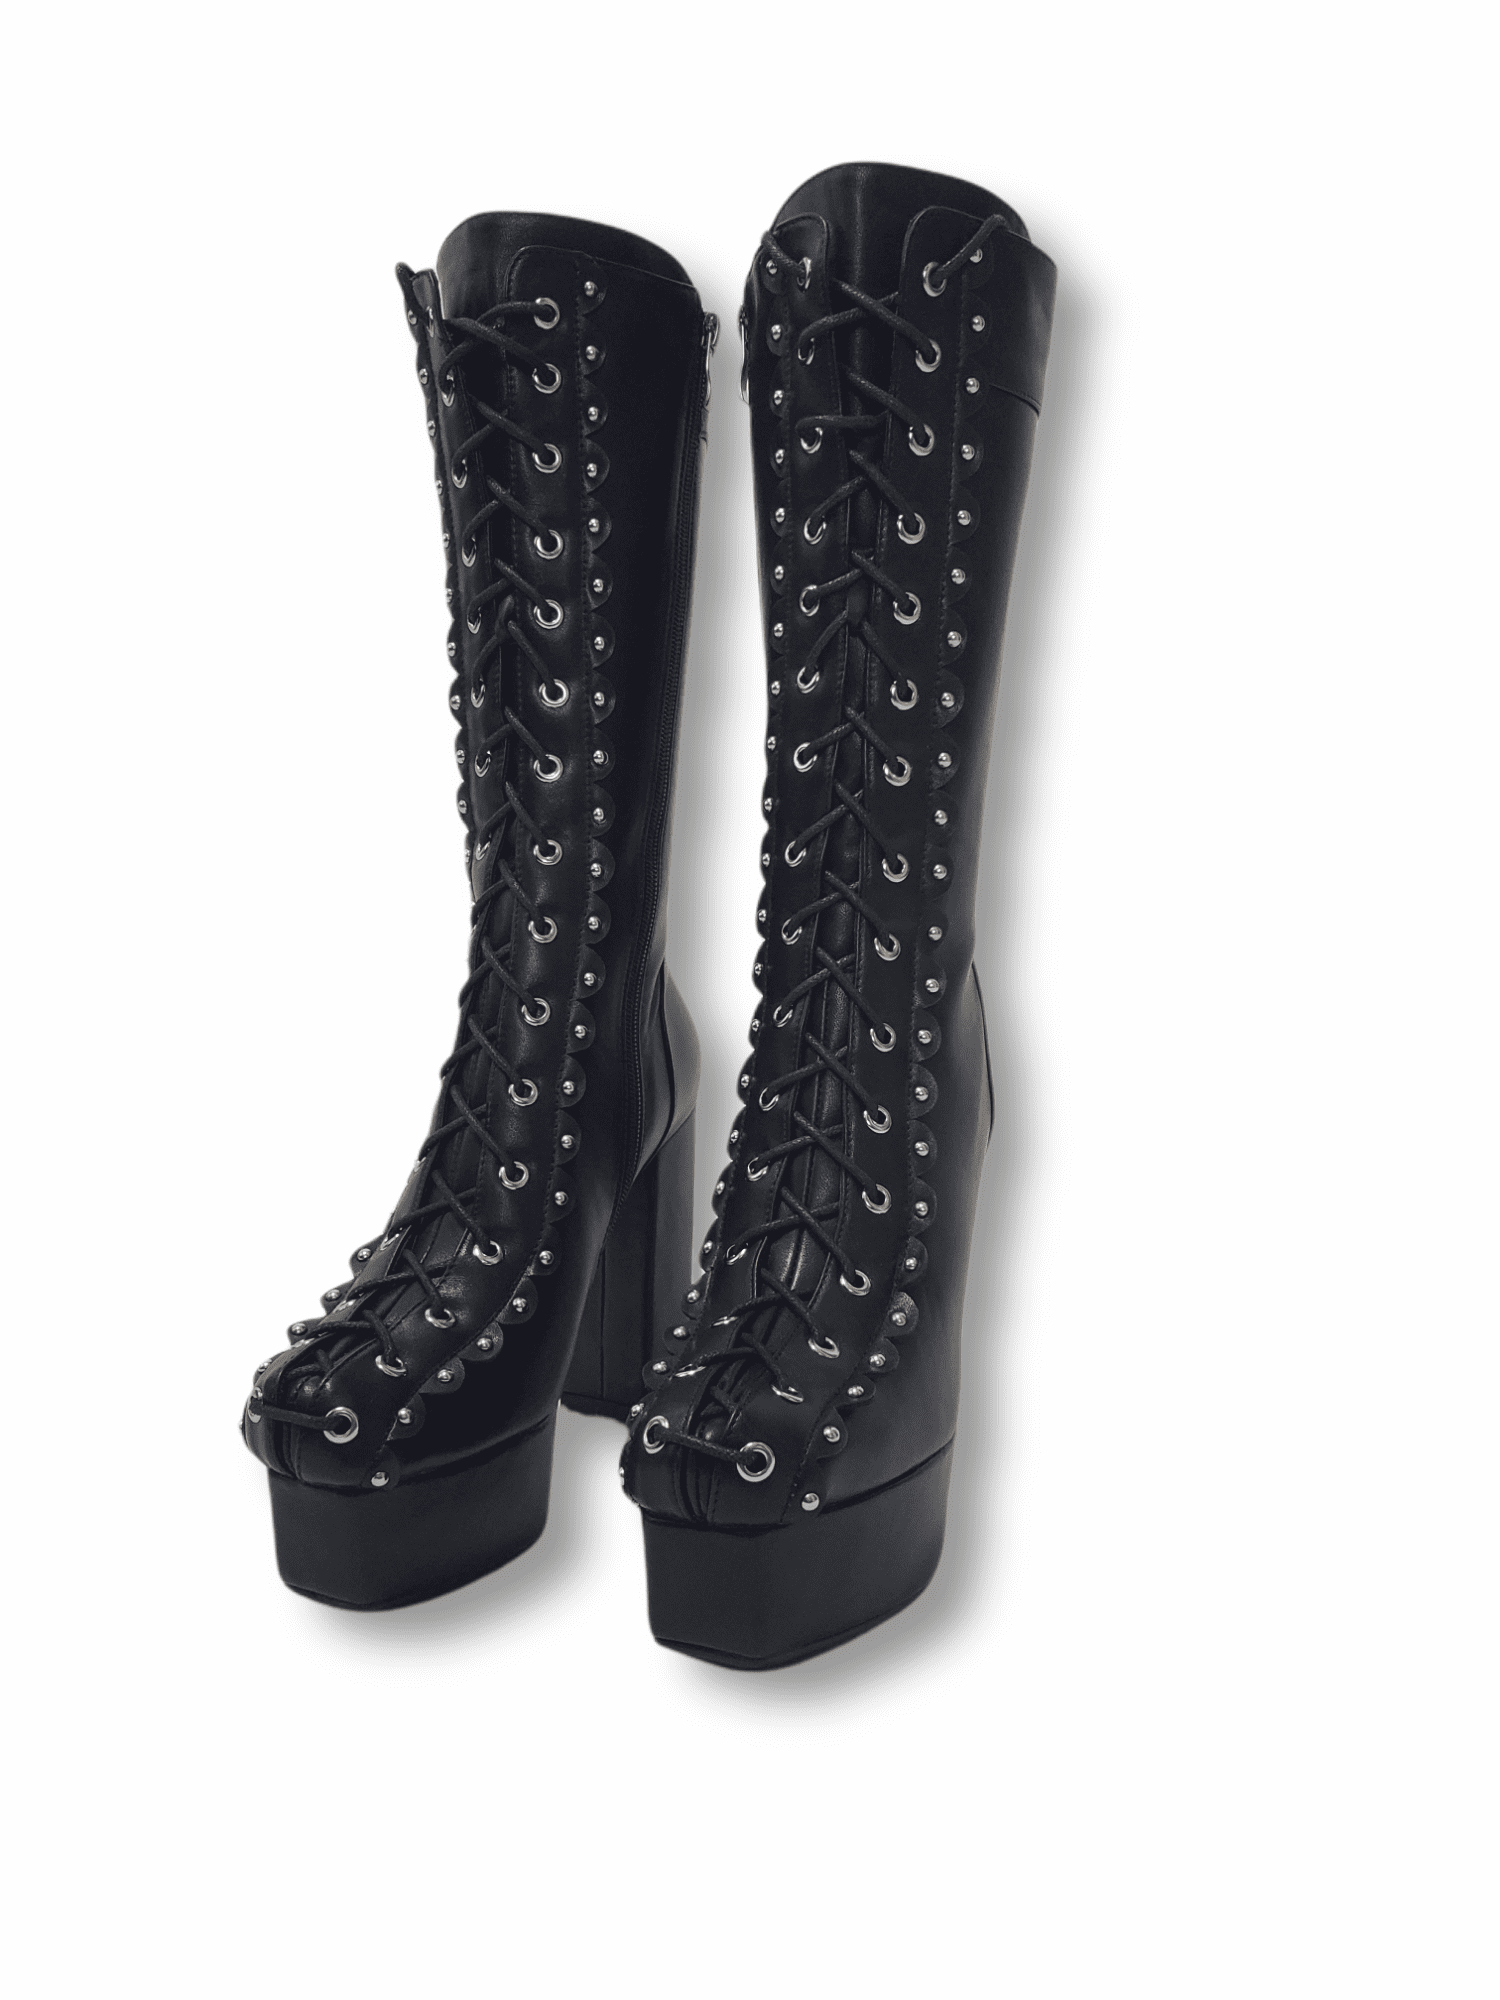 Gothic Spiked Platform Boots | tunersread.com